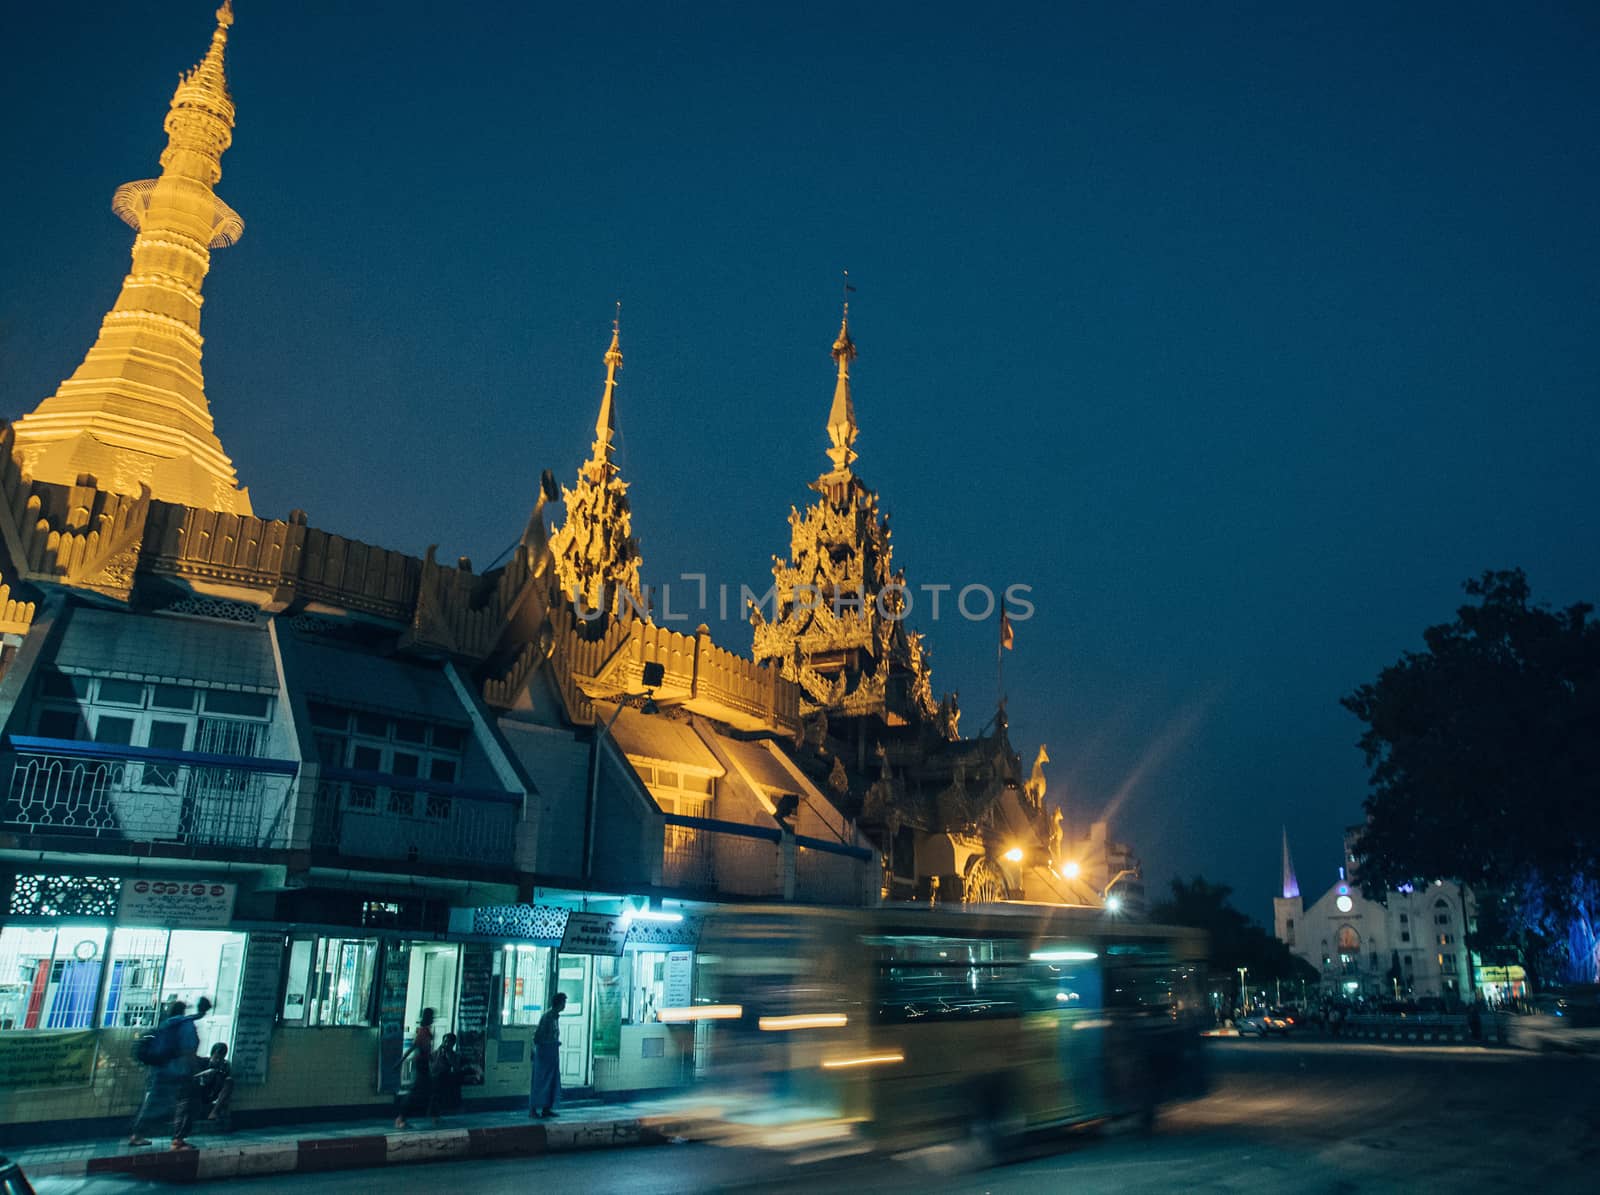 Sule Pagoda located in the heart of Yangon, Myanmar, Burma. Traffic is shown moving with blur to show action.